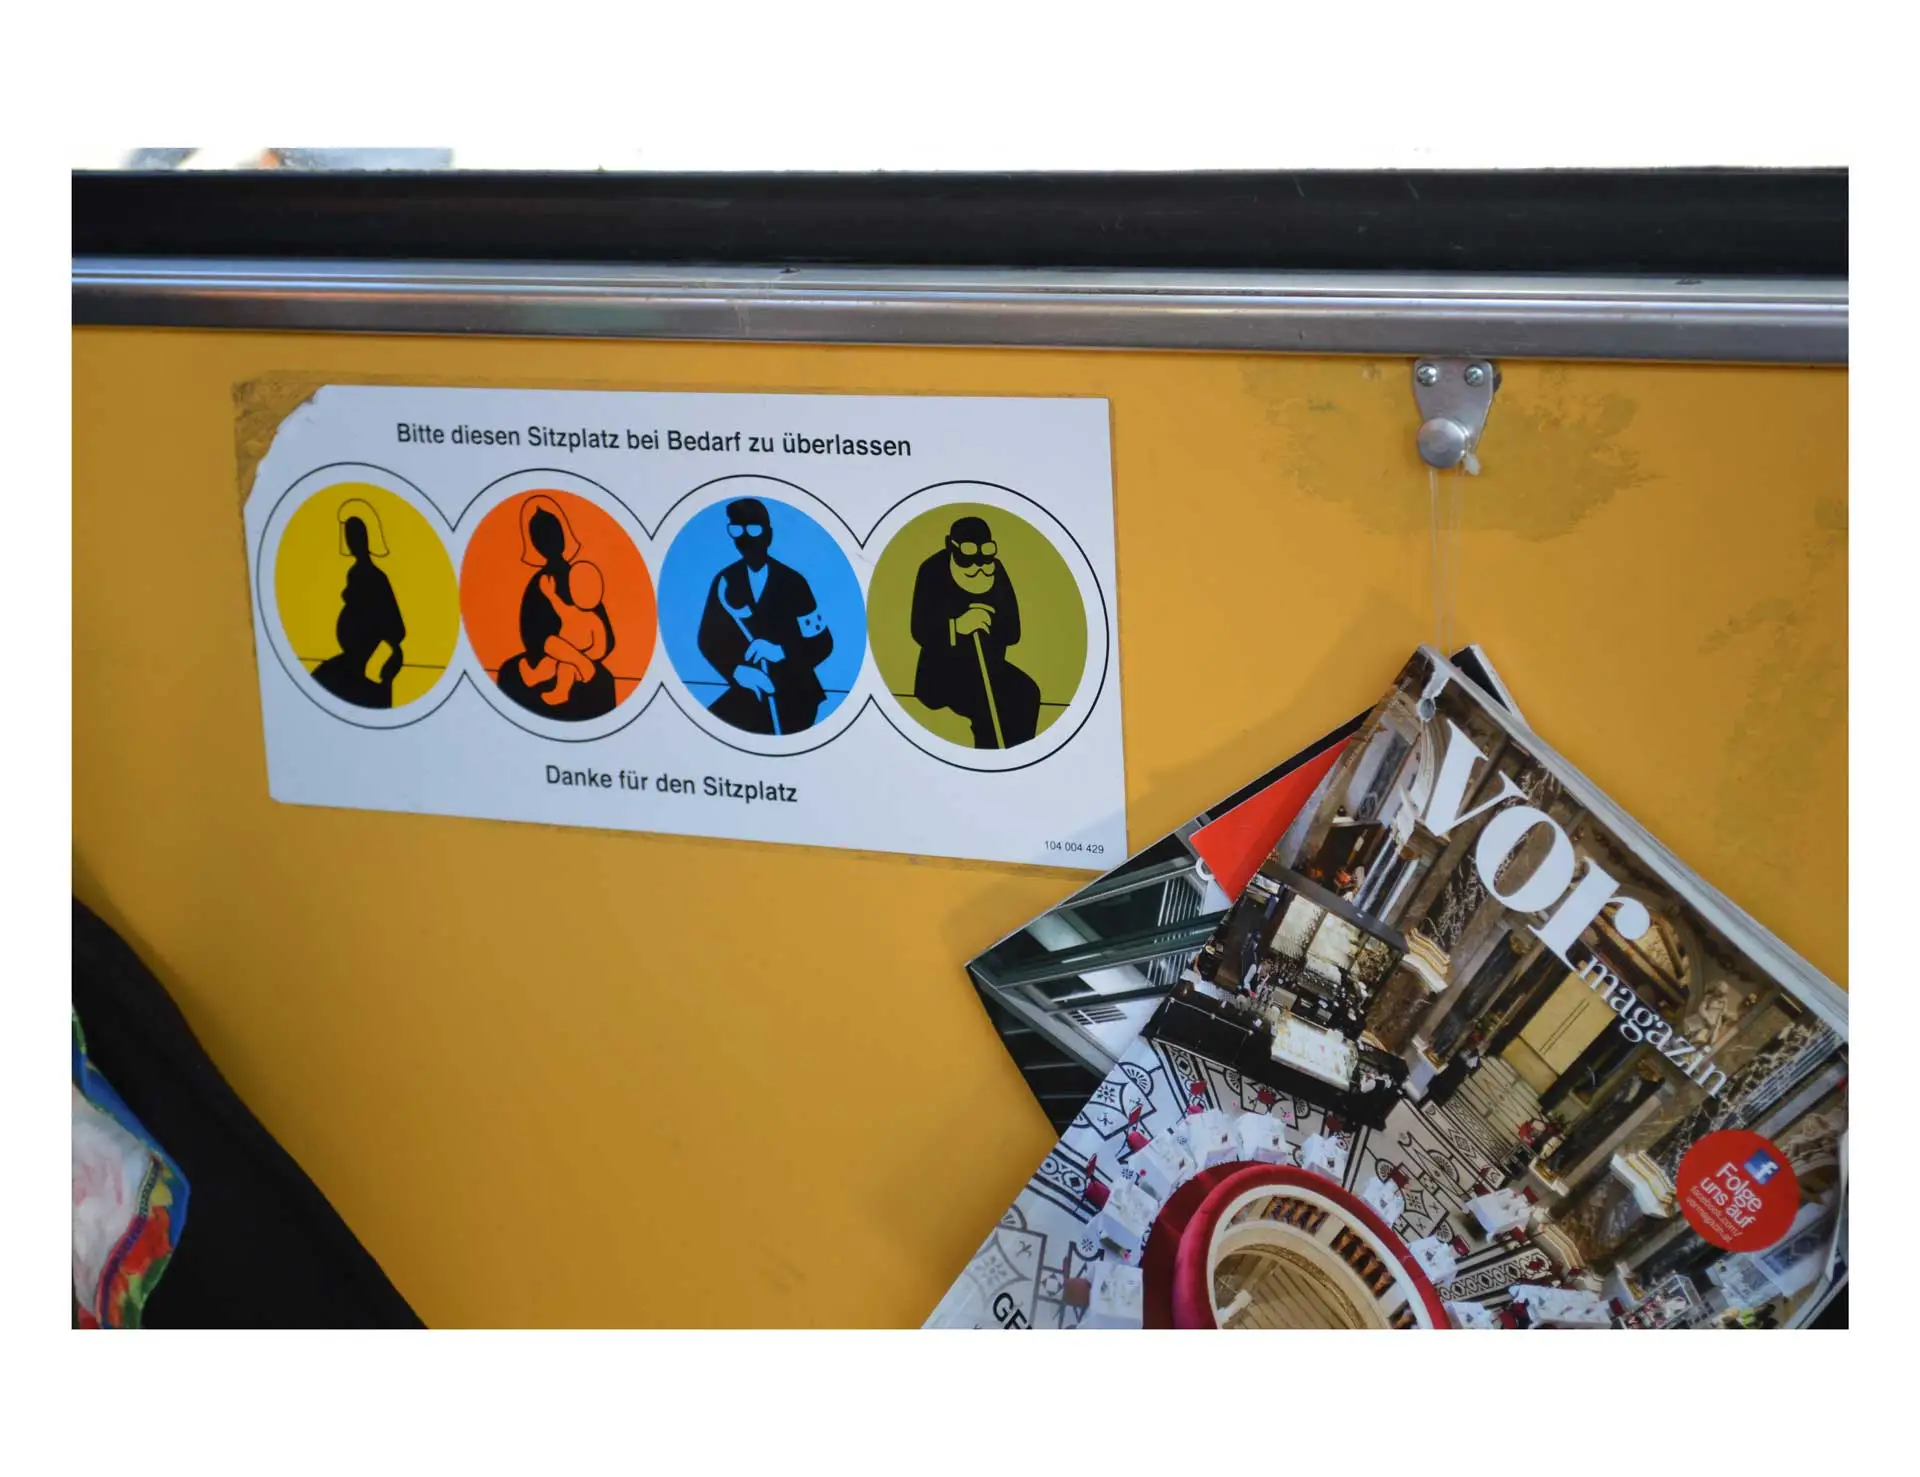 a sign depicting icons of people sitting, the text on the sign is in German